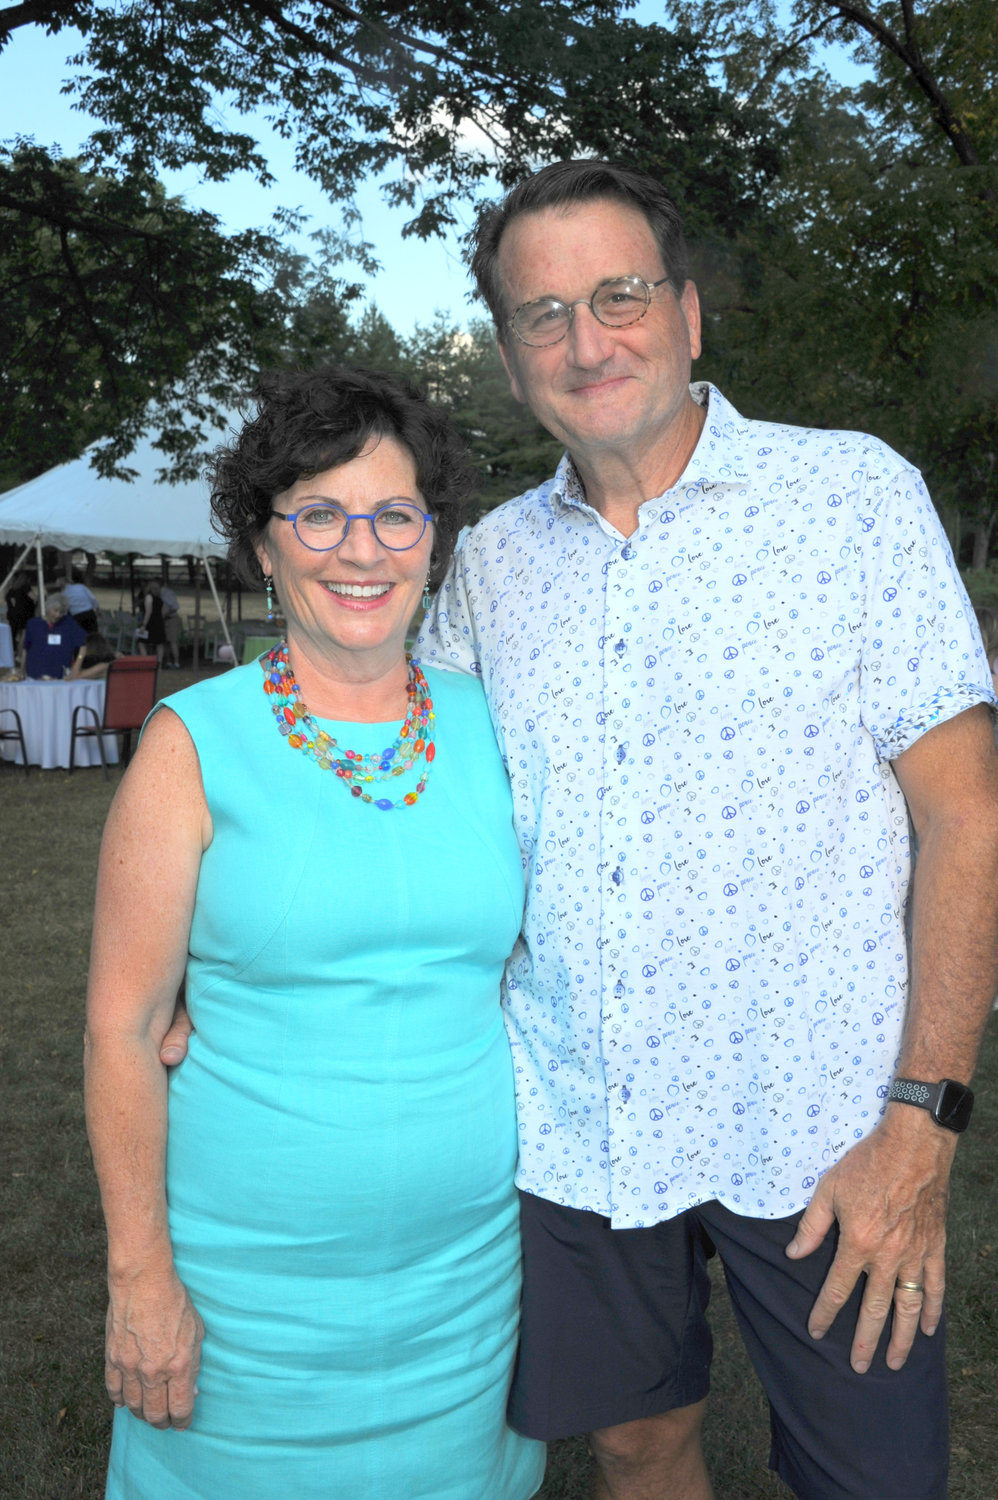 Hosts of the event, Beverly and Jeff Fulgham.